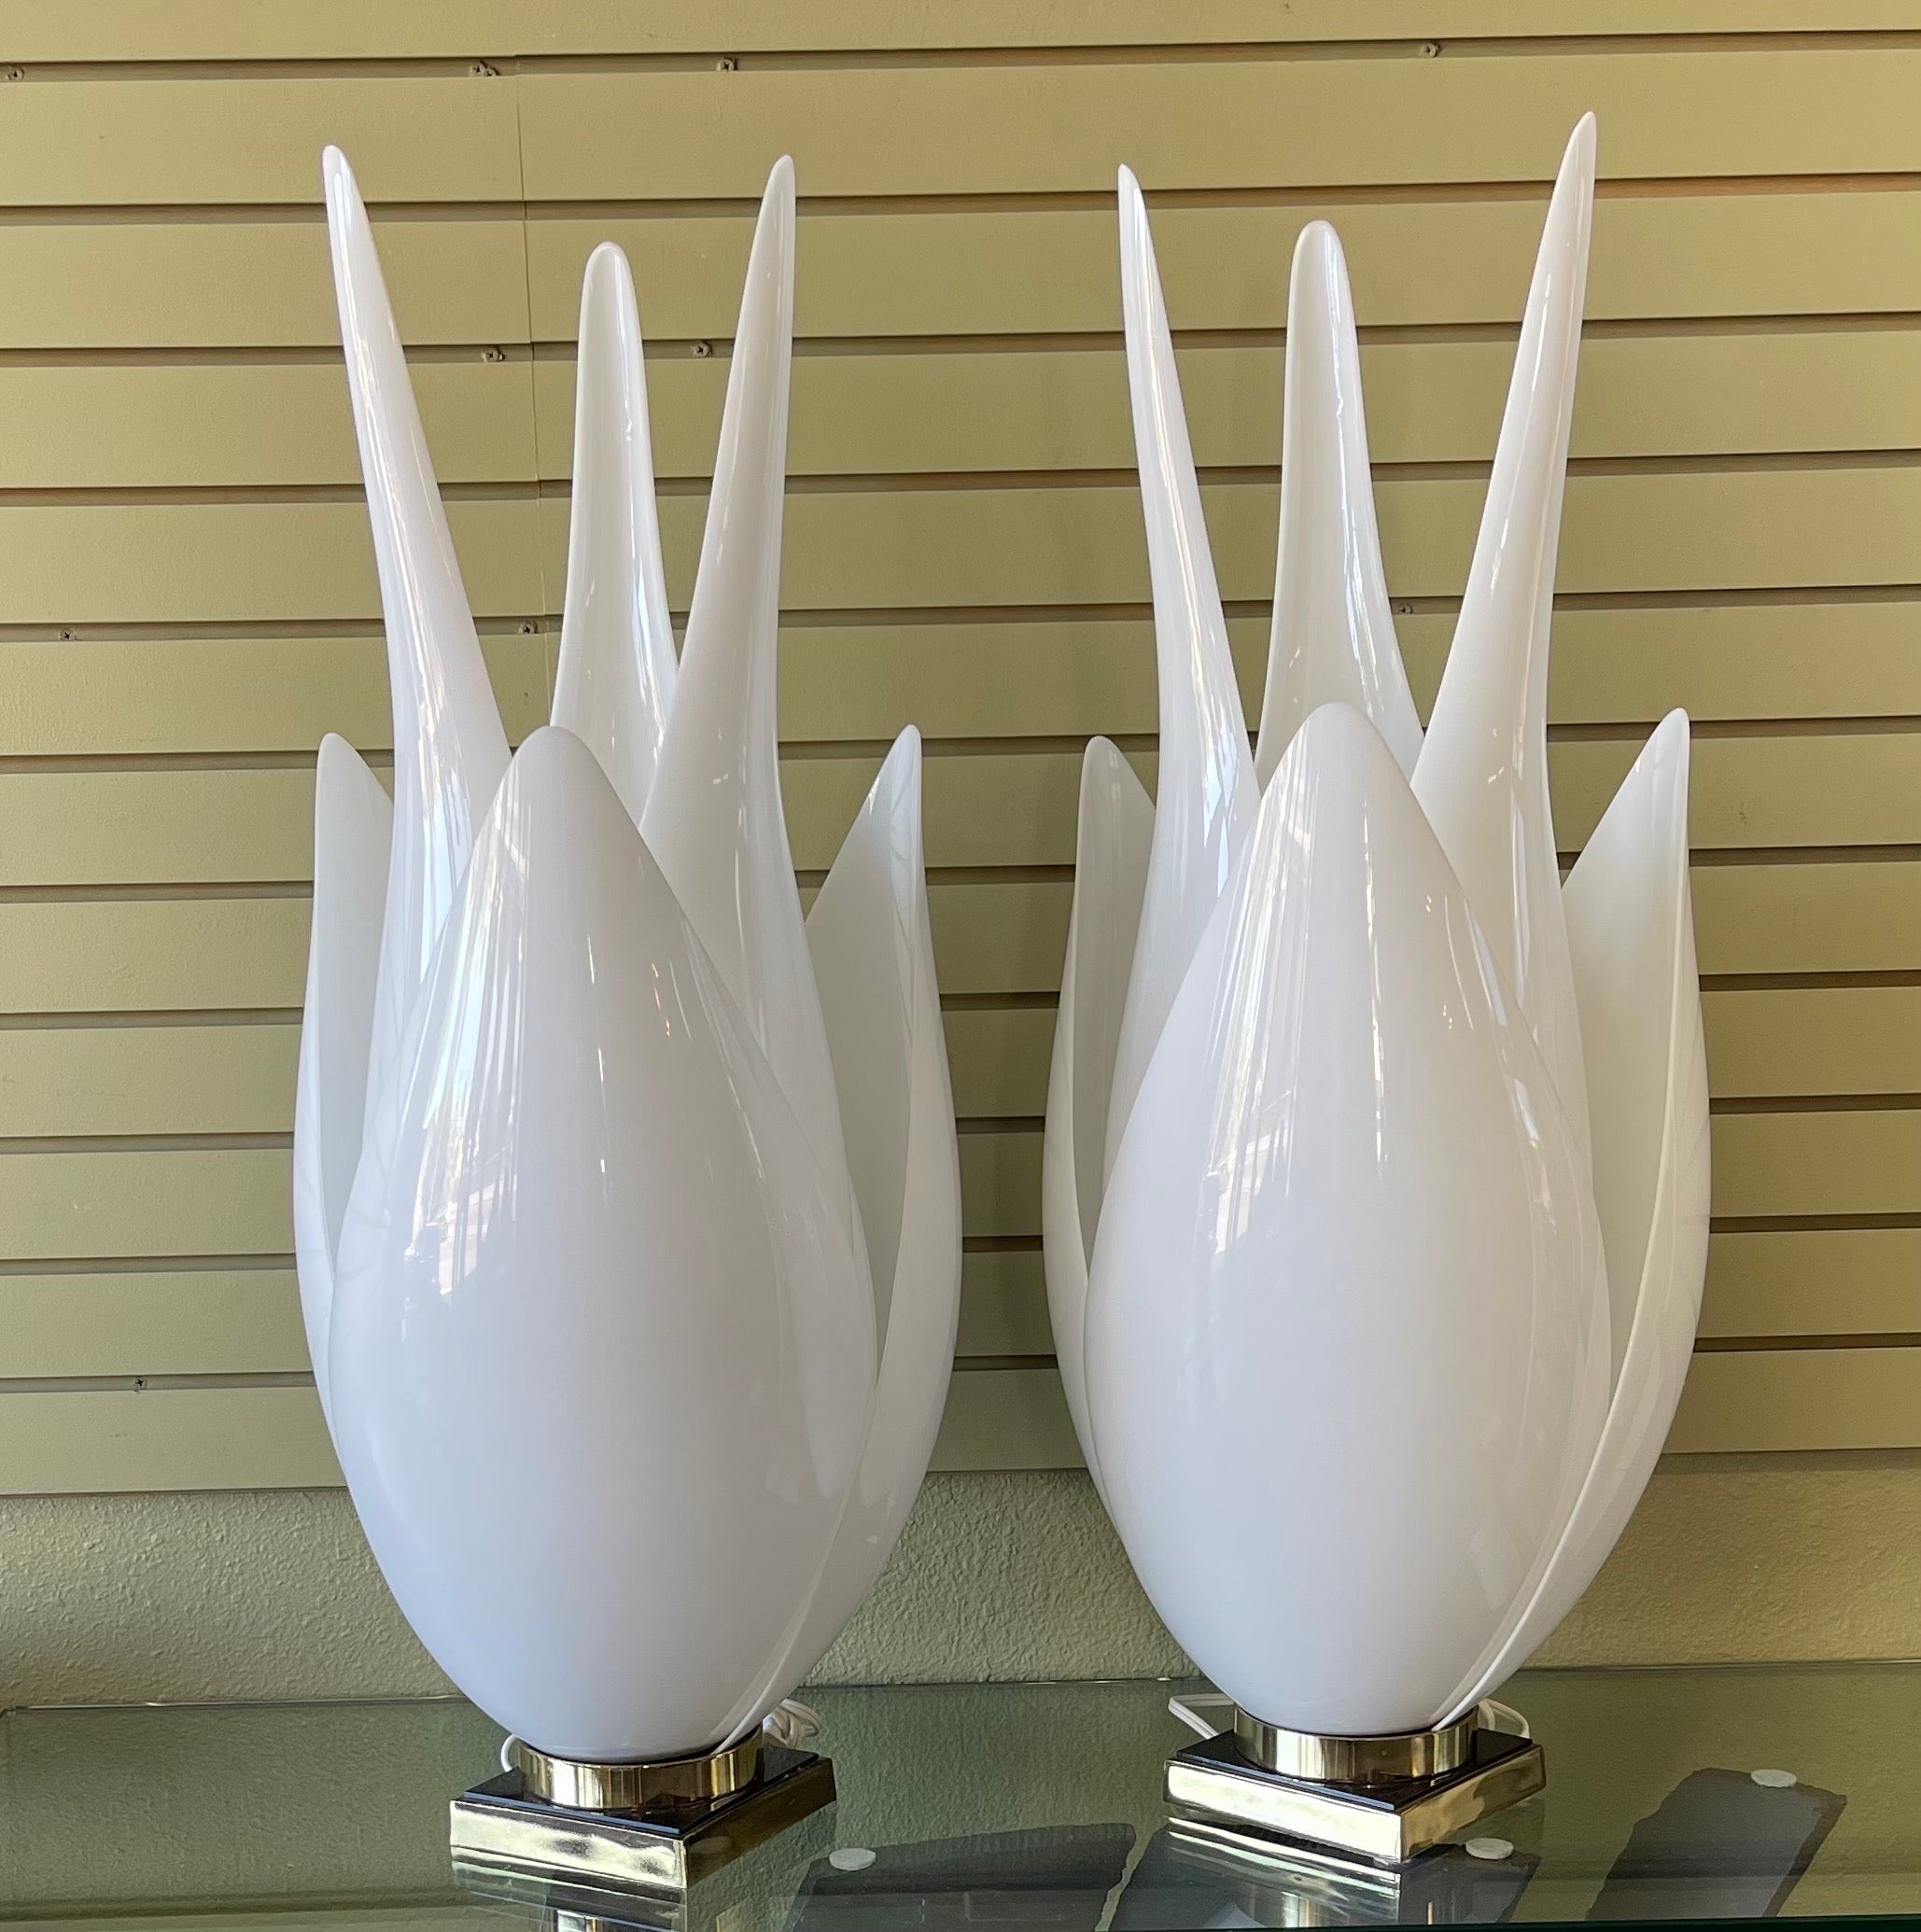 Spectacular pair of vintage oversized “Tulip” lamps designed and manufactured by Roger Rougier in Canada, circa 1970s. The pair are in very good vintage condition with no cracks to the acrylic and measure an impressive 17